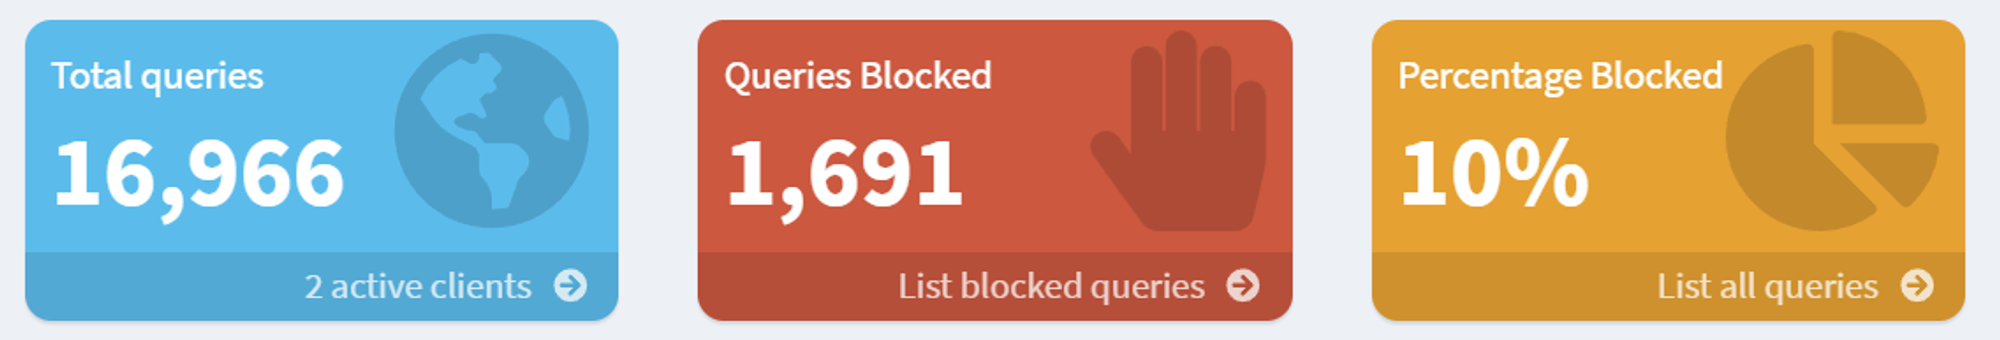 1671 queries (10% of all queries) blocked over the first few hours of use!